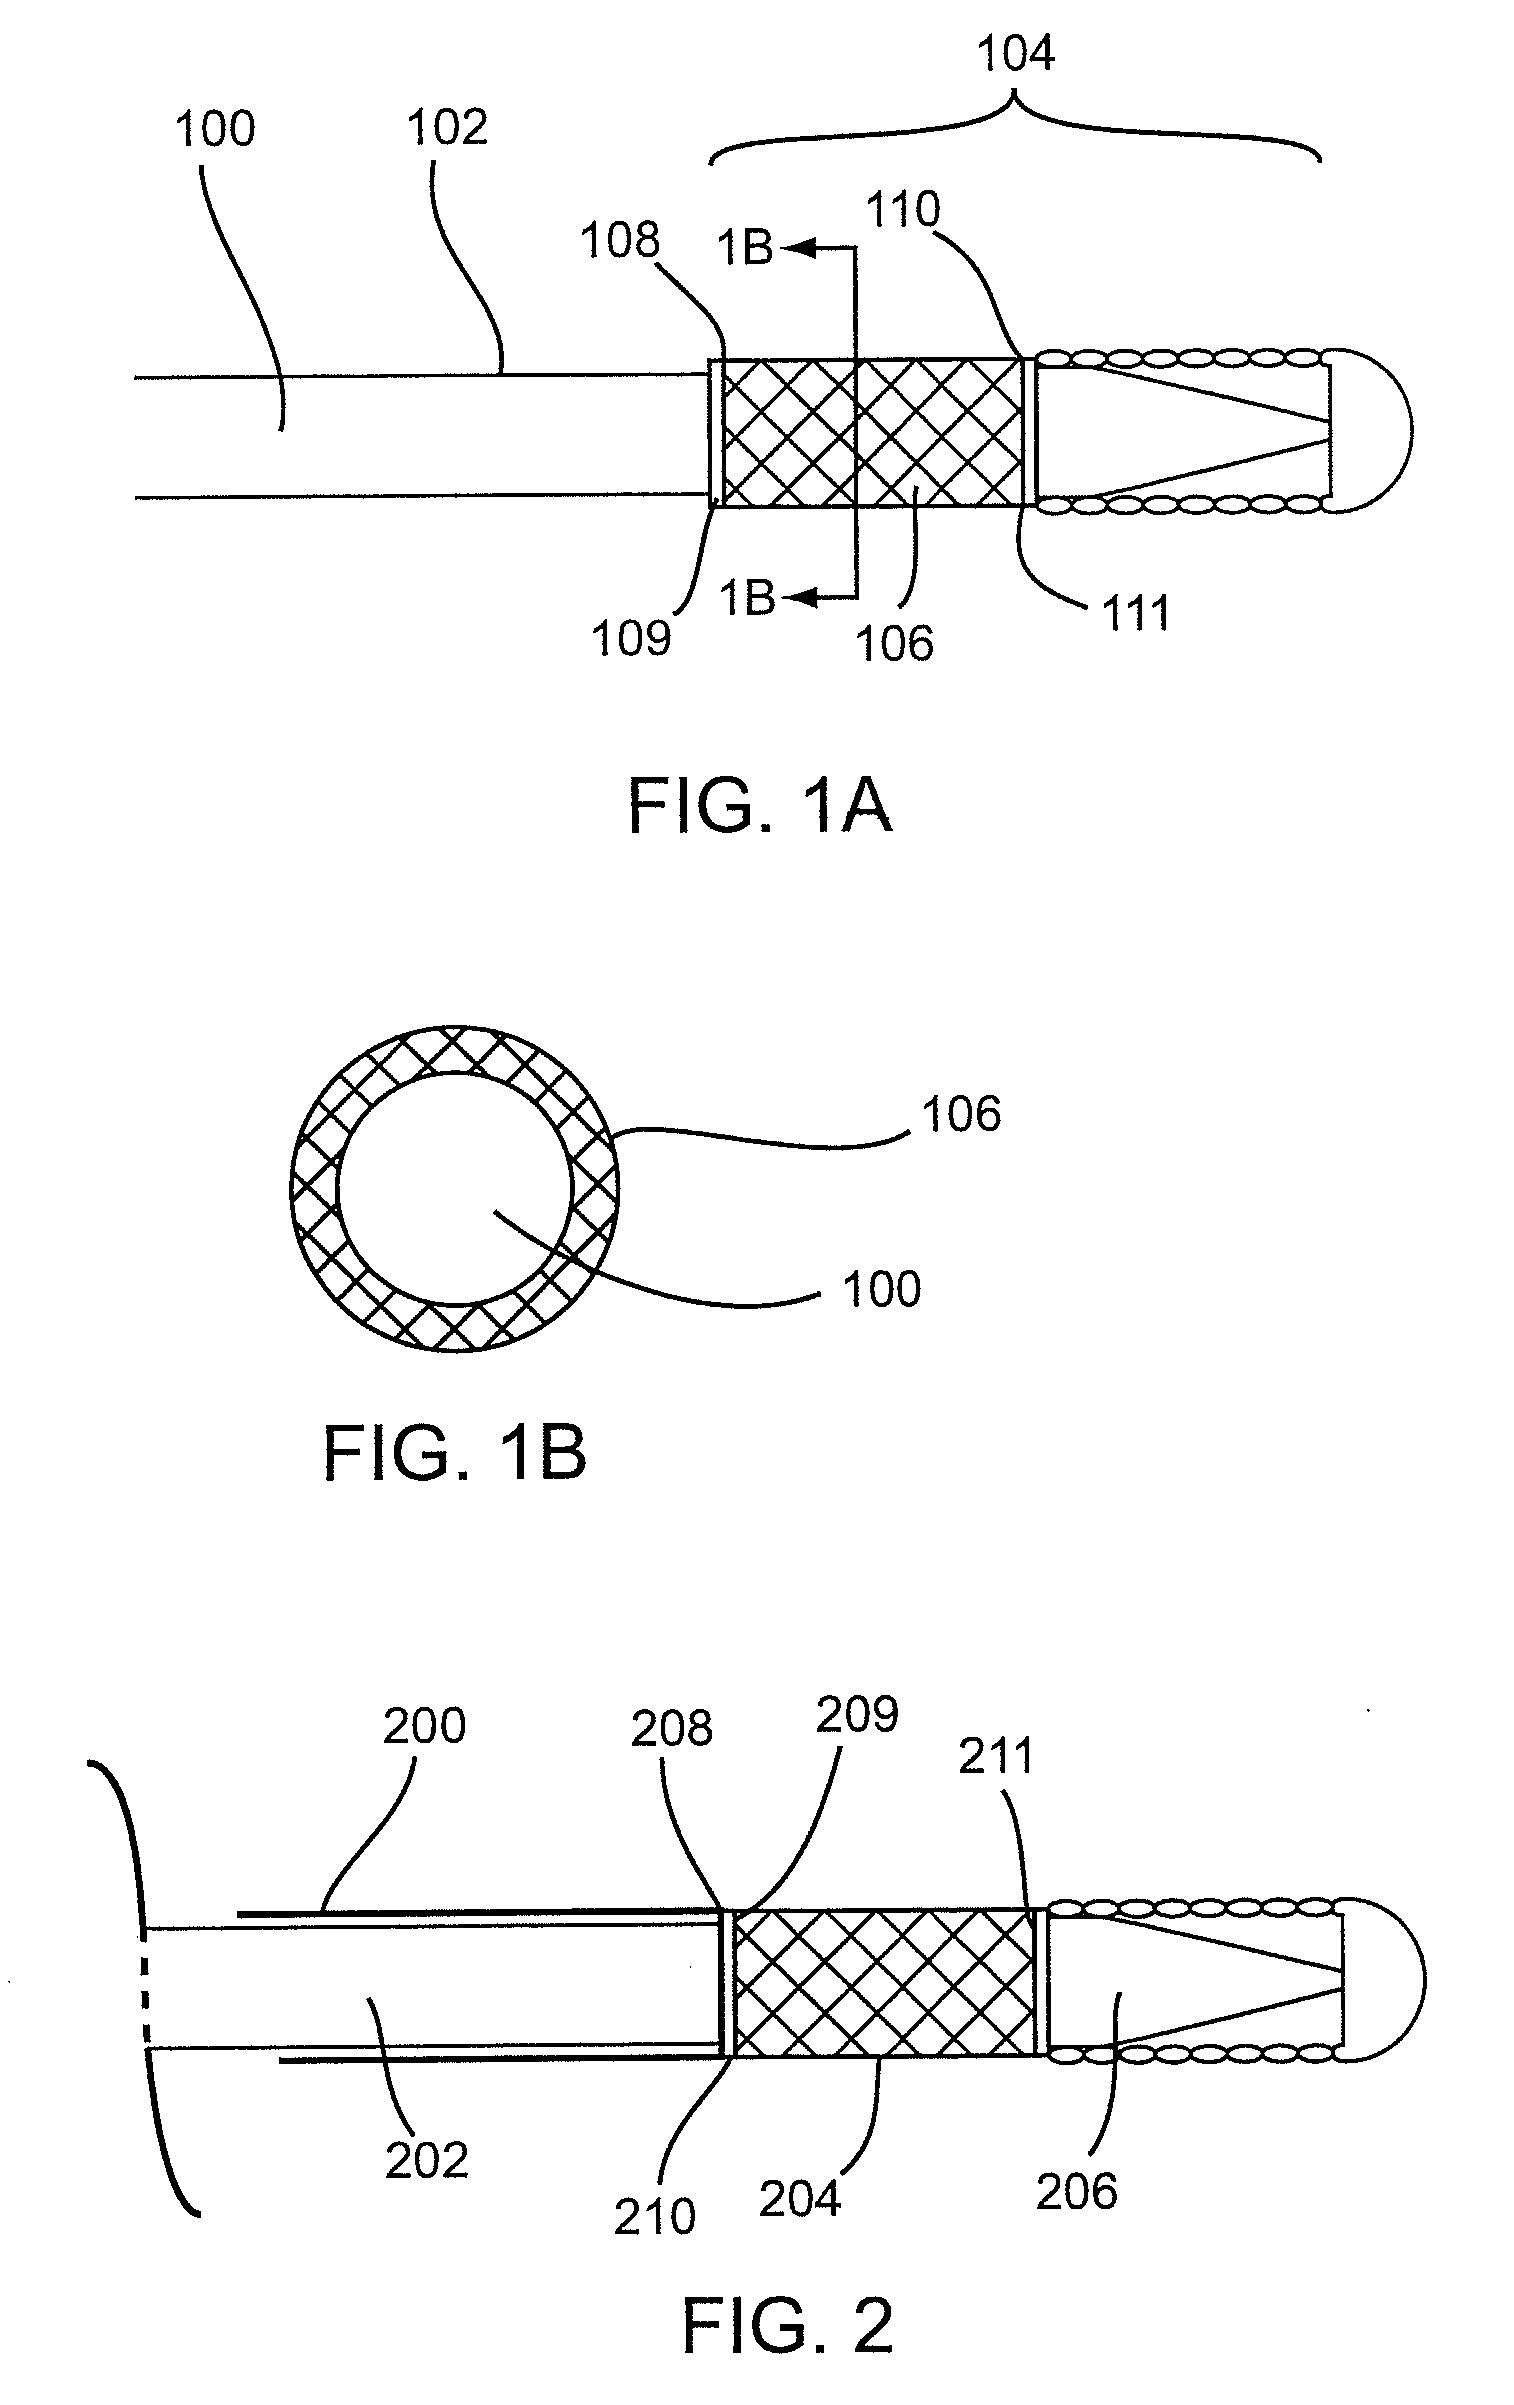 Implant delivery technologies